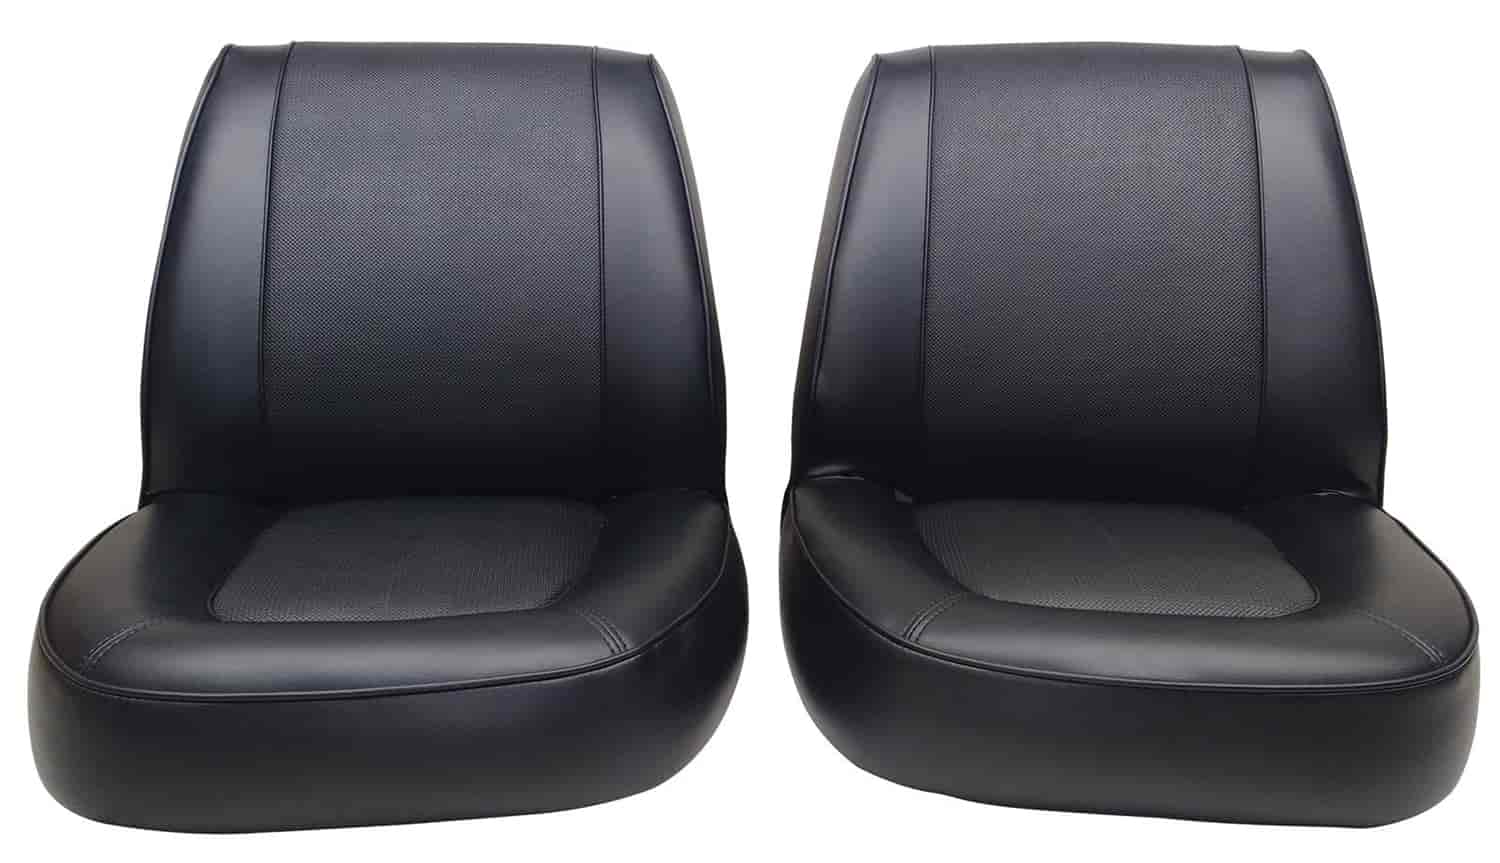 1965 Ford Falcon Futura 2-Door and Ranchero Deluxe Interior Front Bucket Seat Upholstery Set